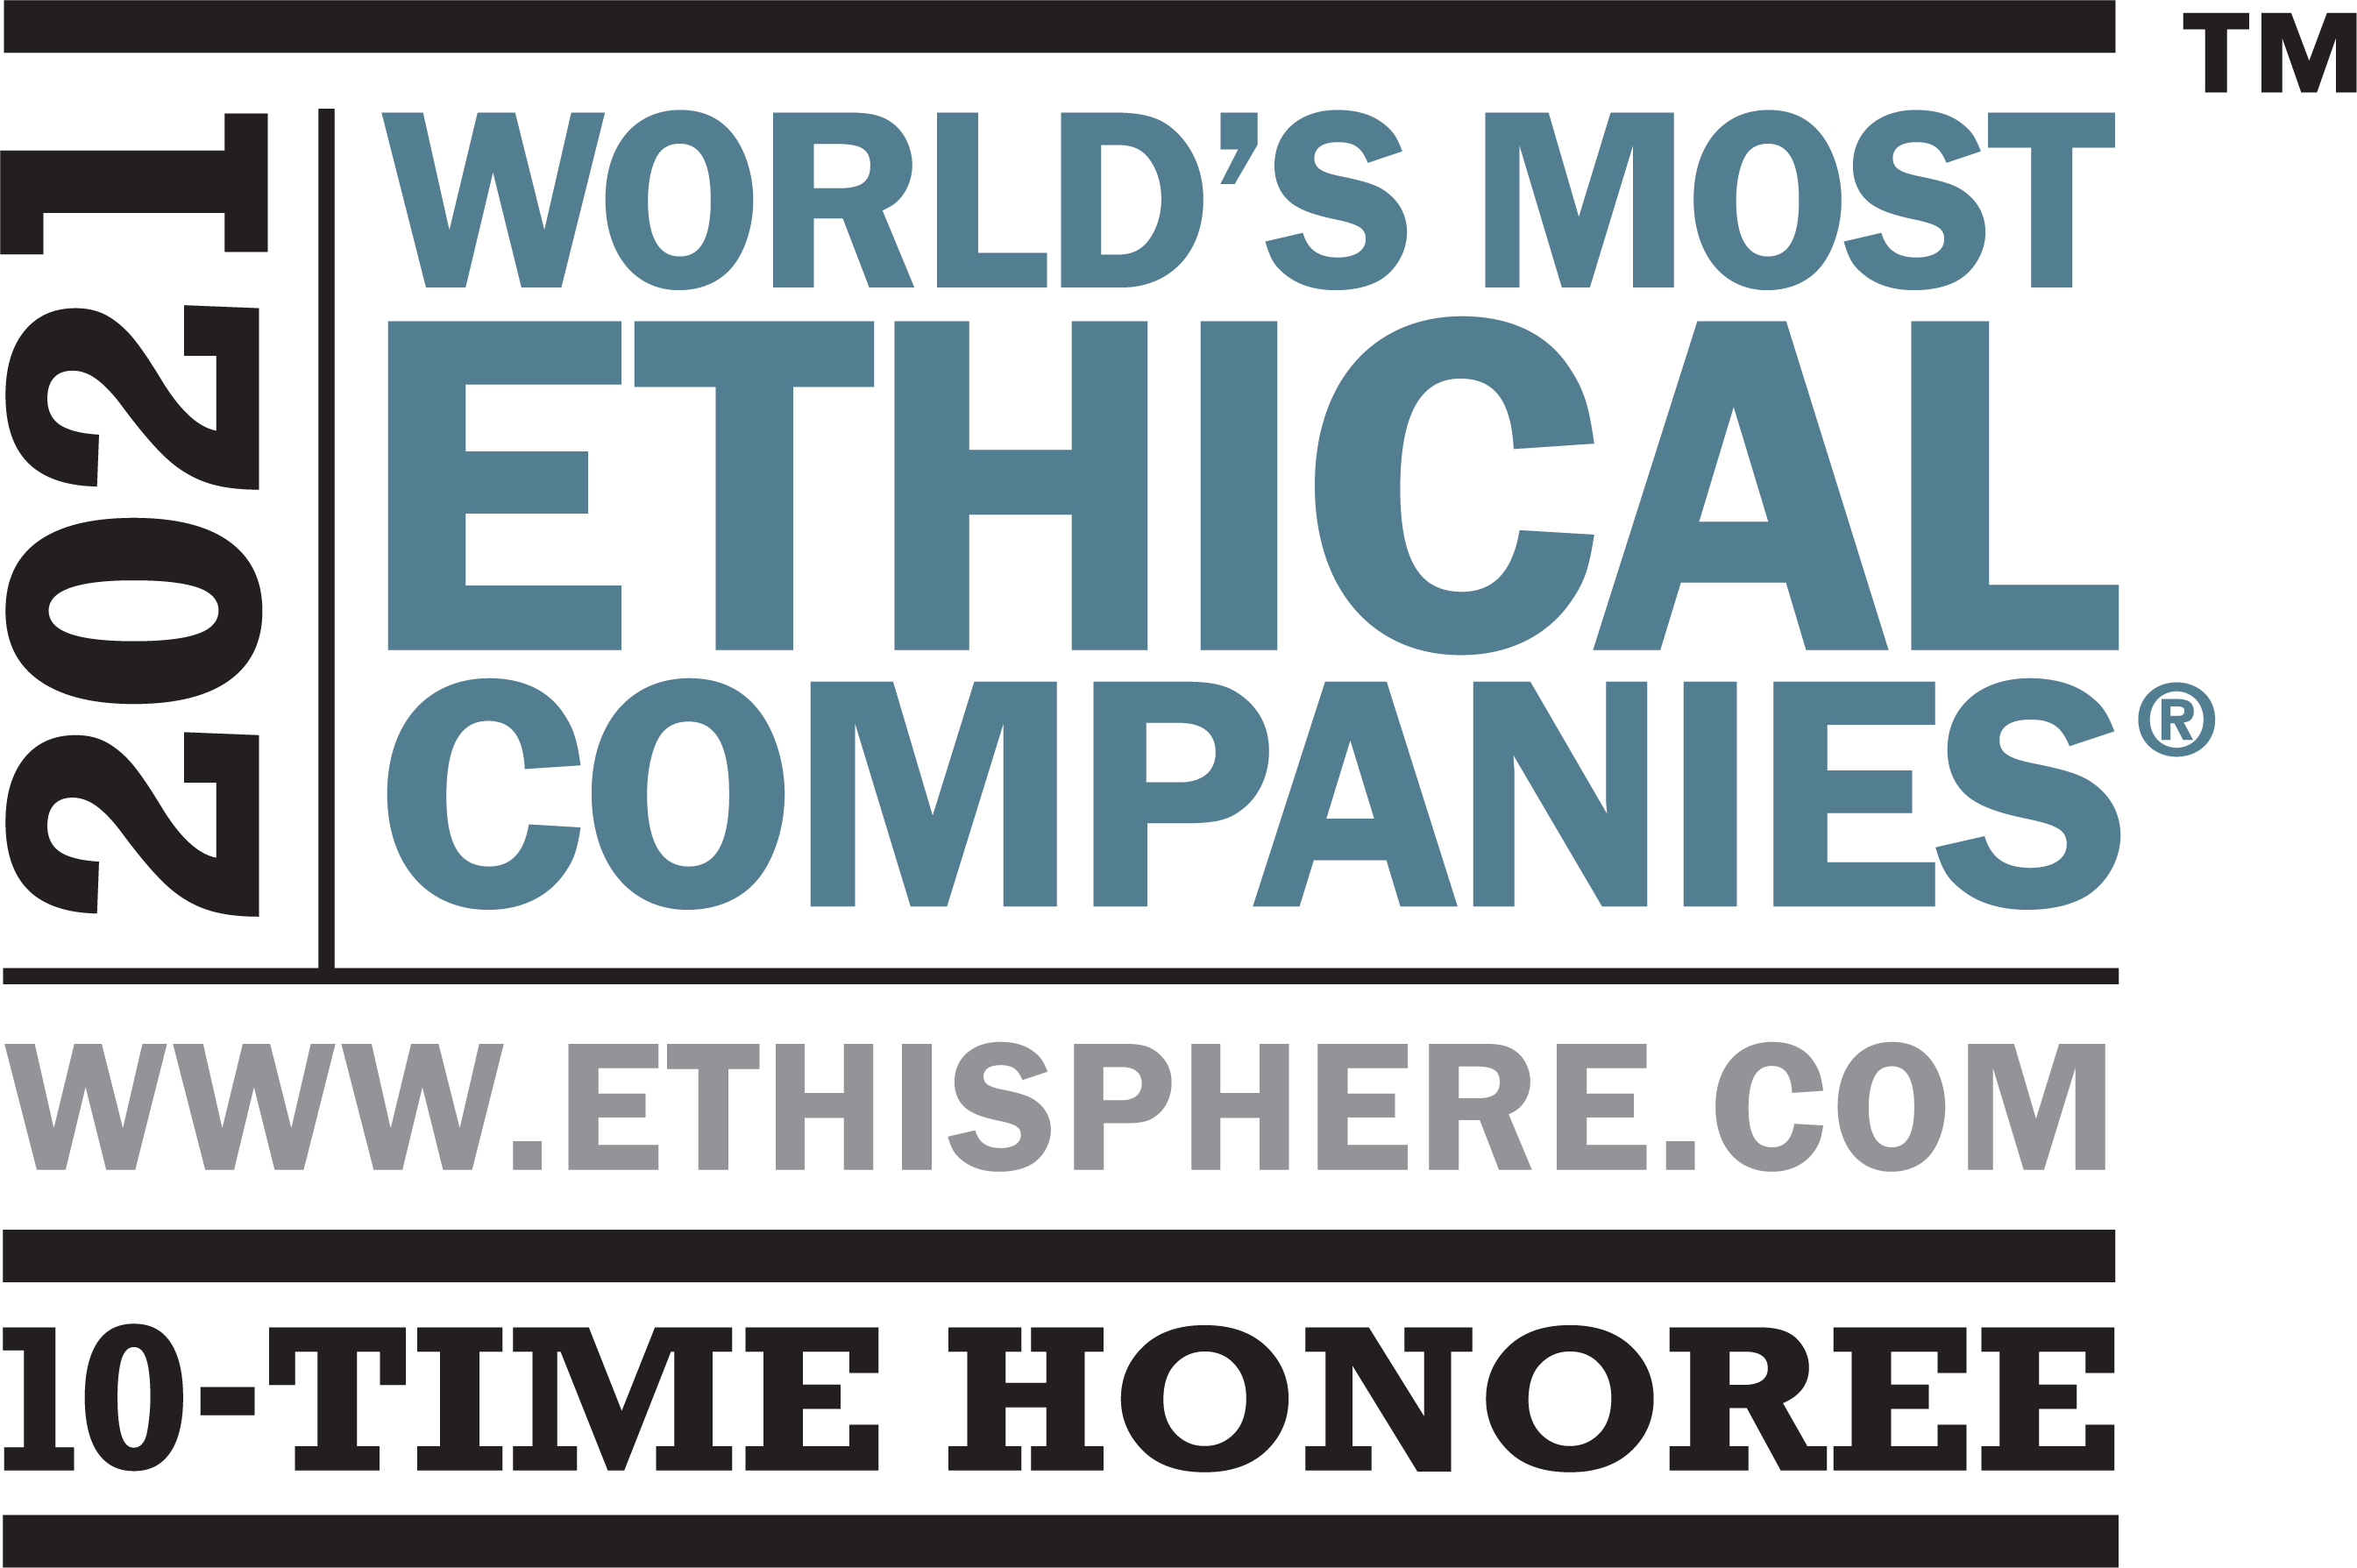 Ethisphere 2020 World's Most Ethical Companies